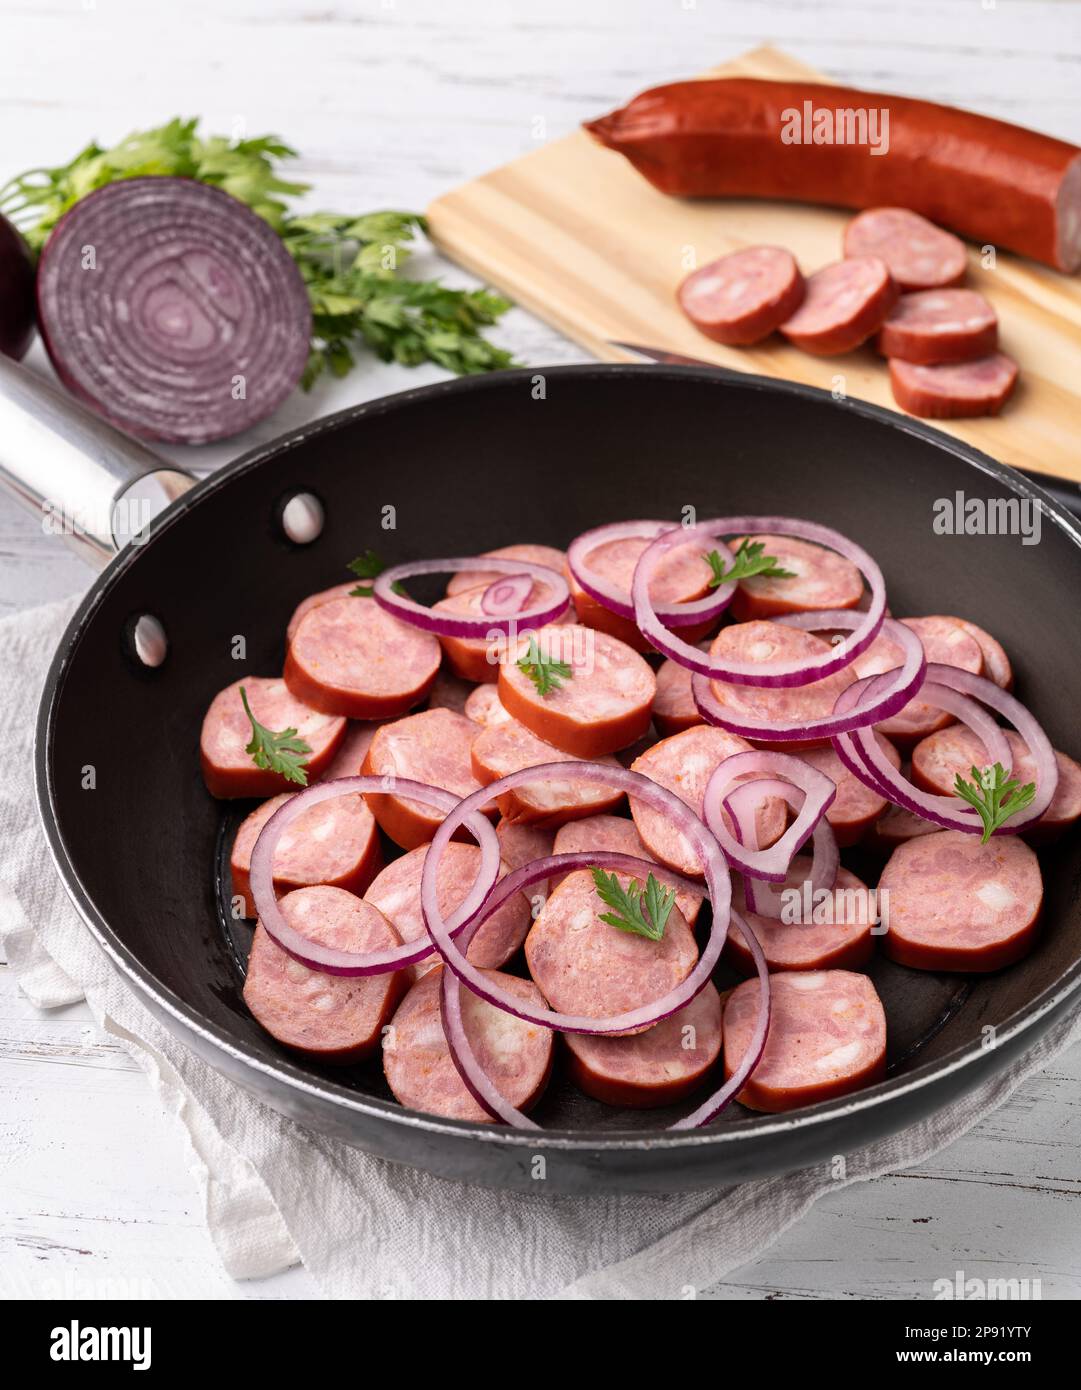 Uncooked calabrese sausage slices in a pan with onion, pepper and herbs over white wooden table. Stock Photo